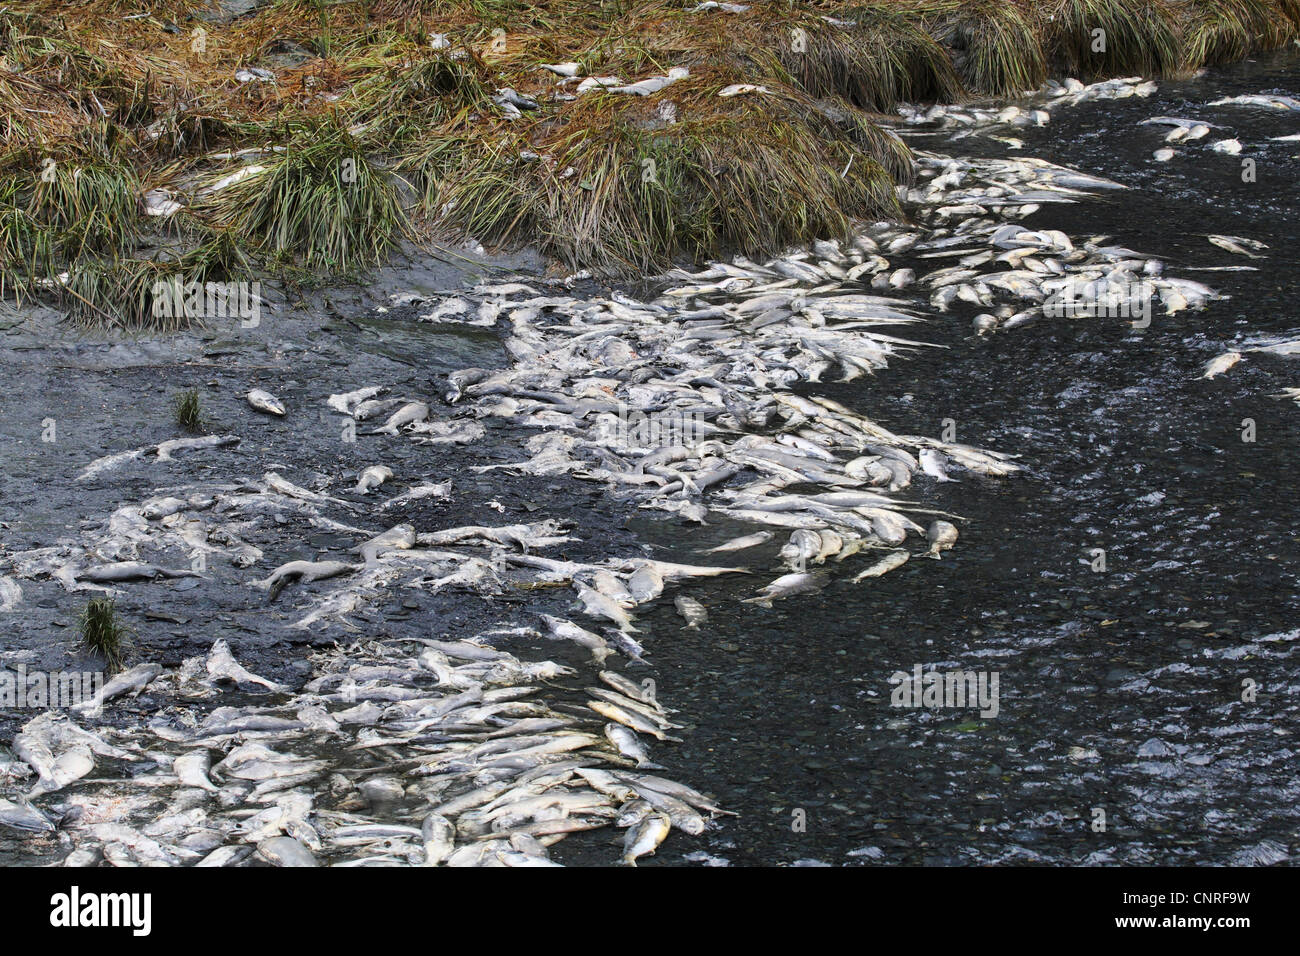 Pacific salmon (Oncorhynchus spec.), dead salmons at river shore after spawning, USA, Alaska Stock Photo